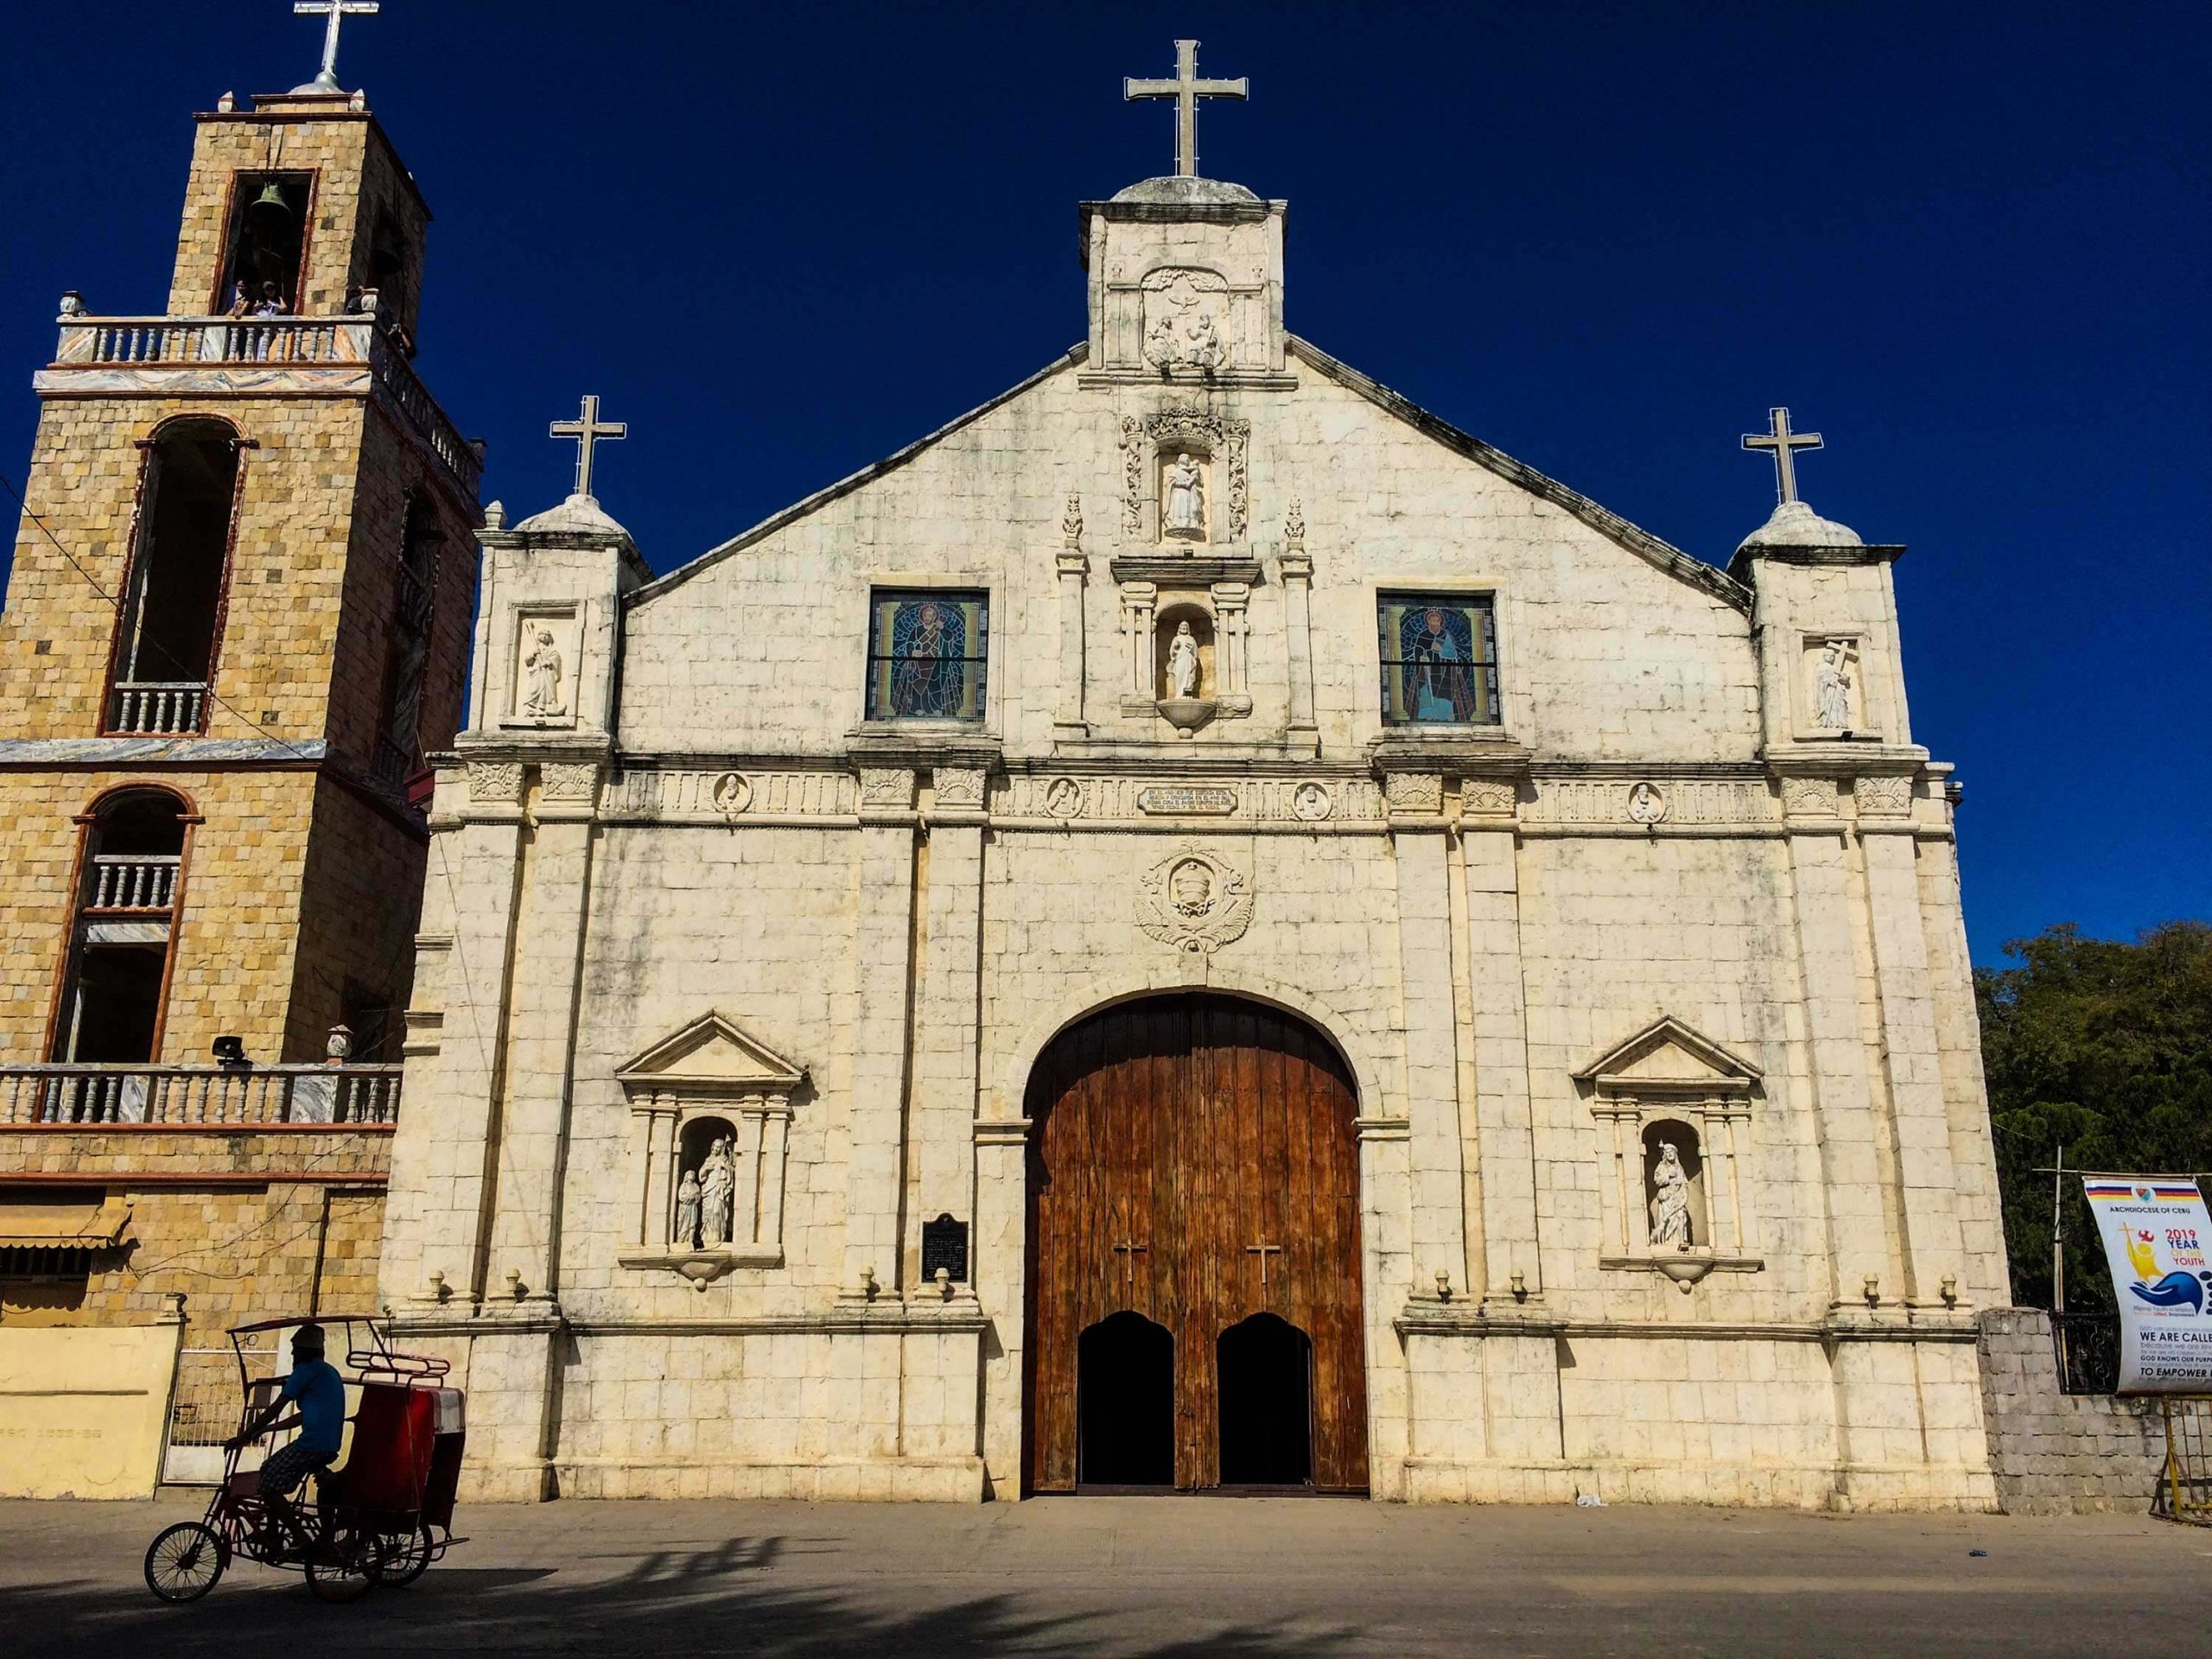 BANTAYAN PARISH. The parish will again be known as the Parish of St. Peter The Apostle. The change to Sts. Peter and Paul in the 1980s was arbitrary and did not go through a canonical process, Church officials said.